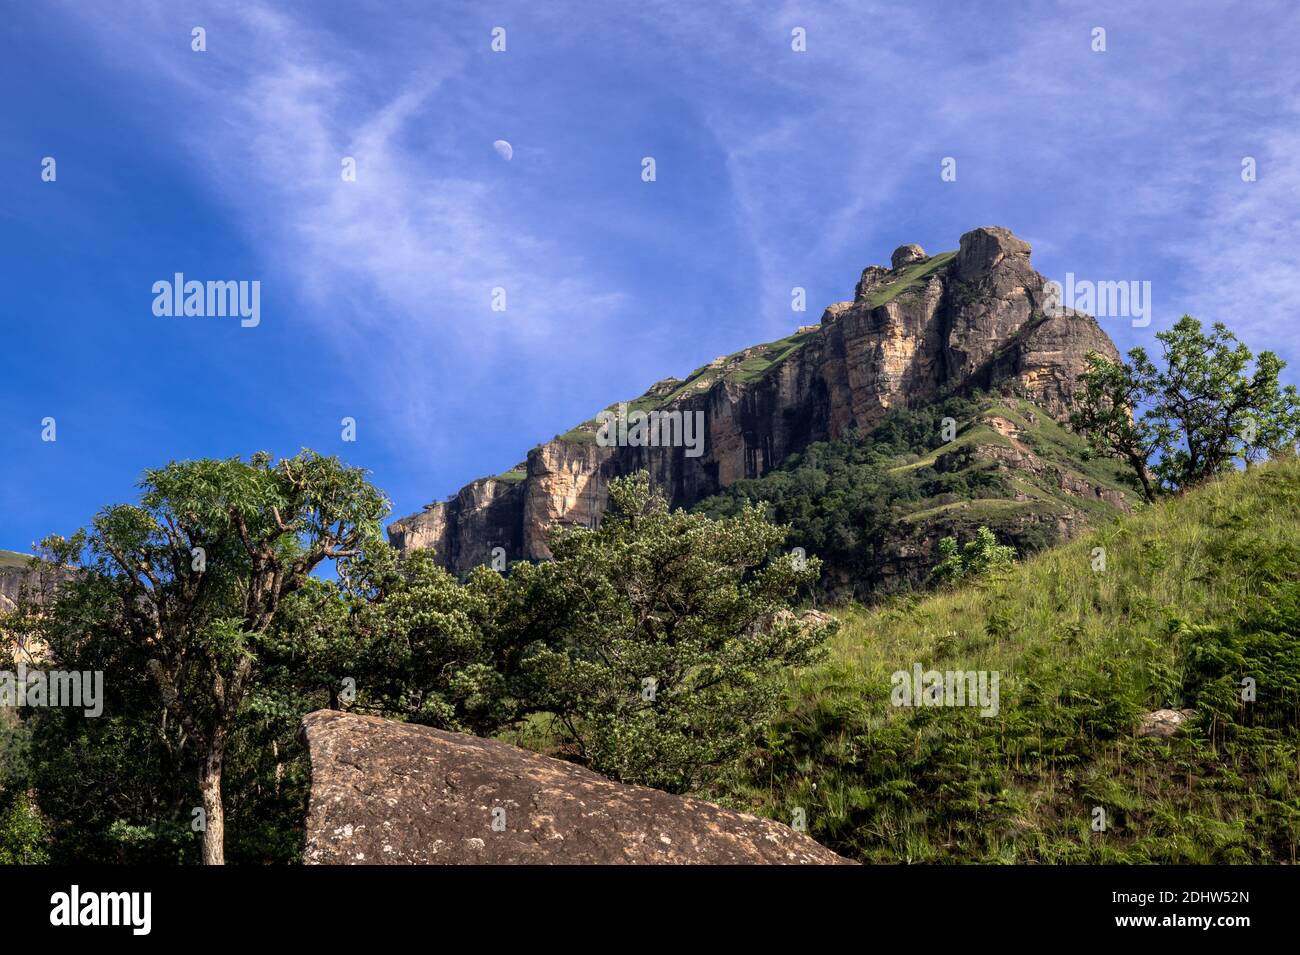 Mountain jutting on rocky hill against blue skies and greenery in Drakensburg, South Africa Stock Photo